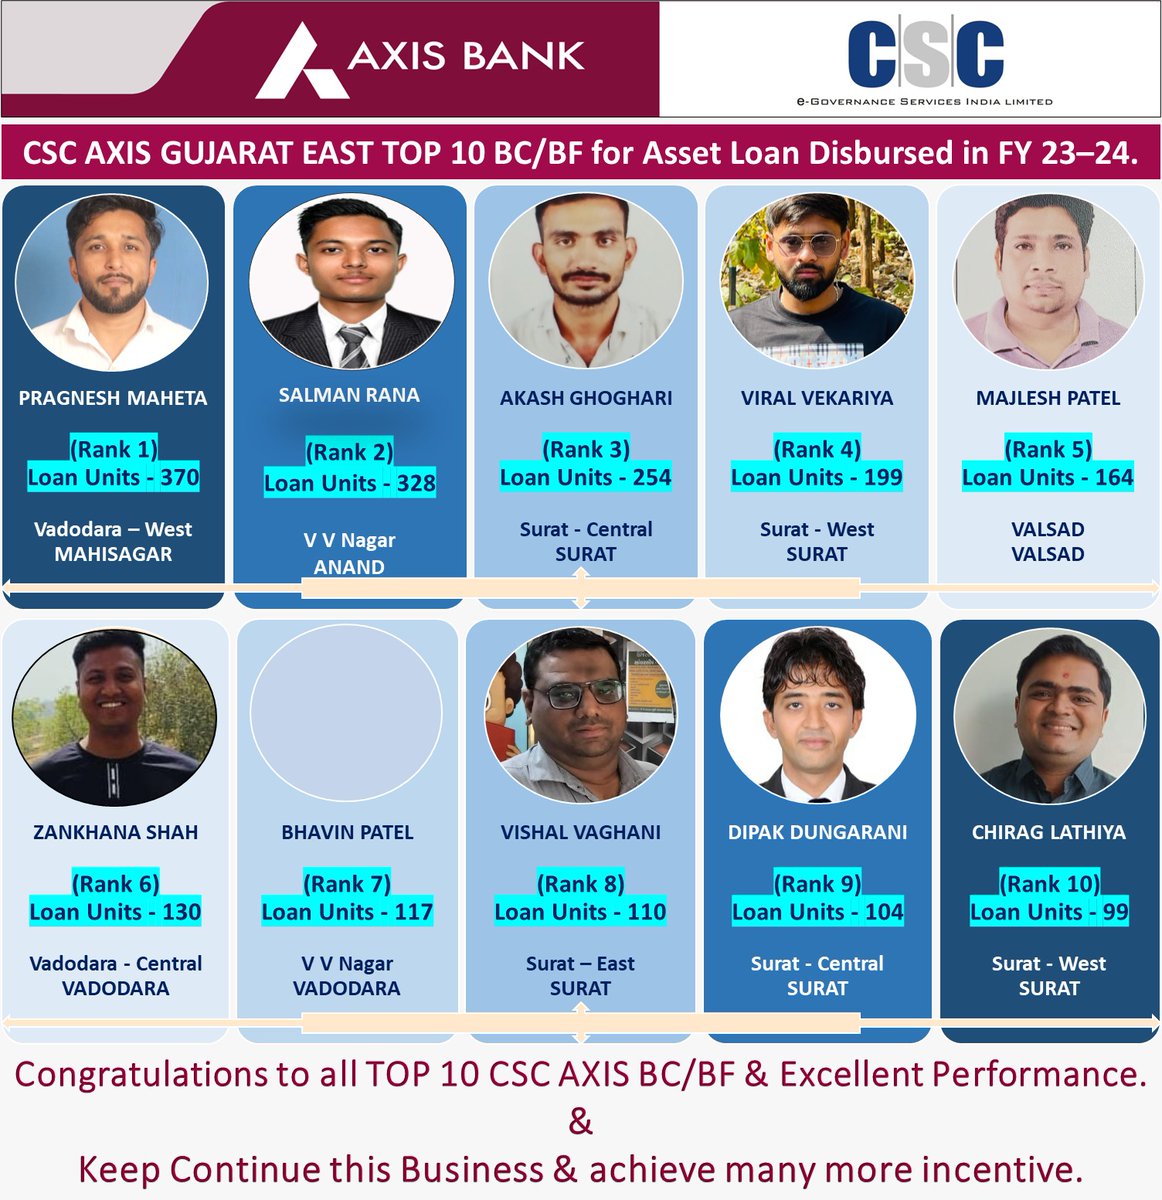 Congratulations!!!!! to all Top 10 Gujarat East #CSC  - Axis VLEs for their excellent performance in Loan disbursement in FY’23-24’.
#cscloan #csc #AxisBank #AxisBankLoan #DigitalIndia